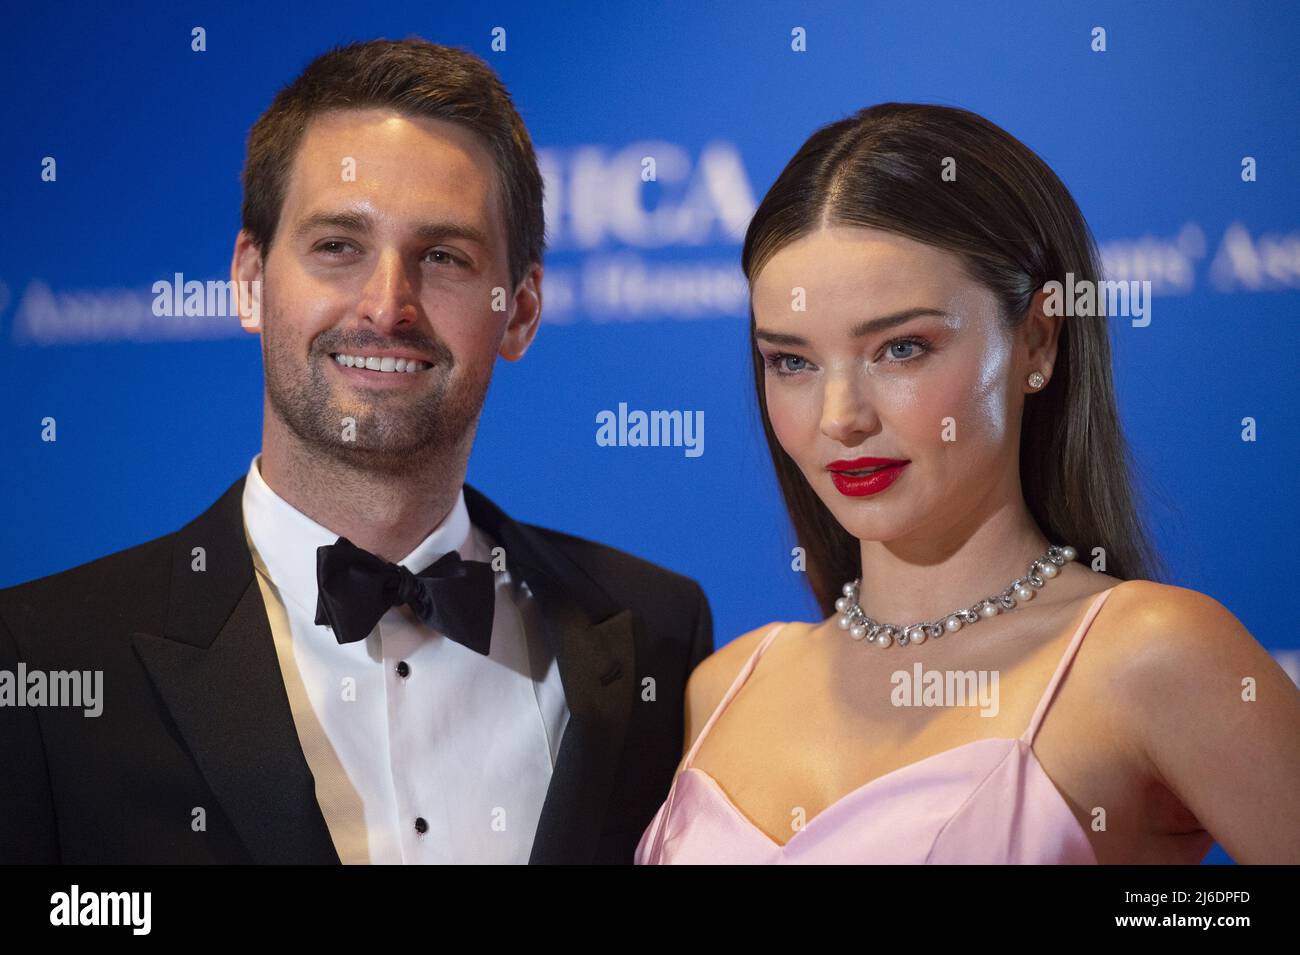 Australian Model Miranda Kerr and Evan Spiegel arrive at the 2022 White House Correspondents' Association Dinner at the Washington Hilton in Washington, DC on Saturday, April 30, 2022. The dinner is back this year for the first time since 2019. Photo by Bonnie Cash/UPI.... . Stock Photo